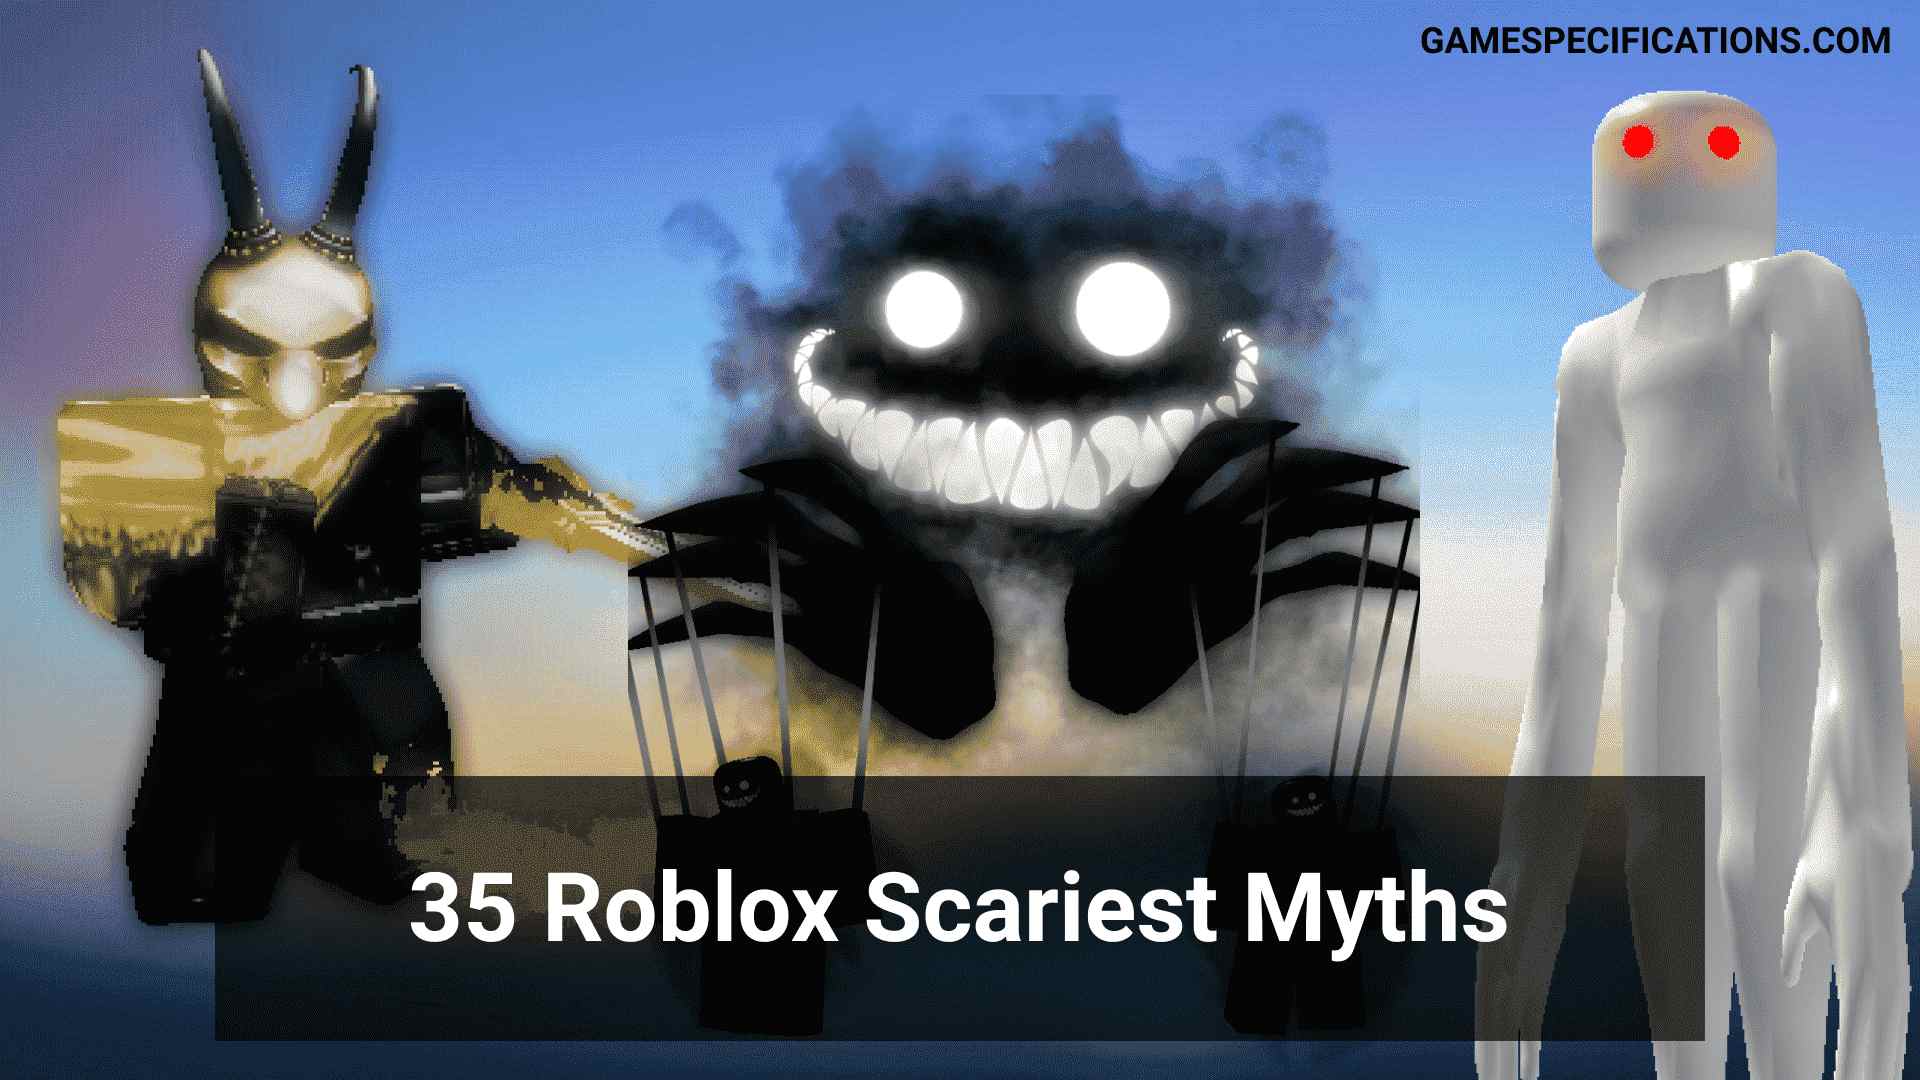 Roblox Myths A Scary Universe Of Roblox Game Specifications - feby trap roblox